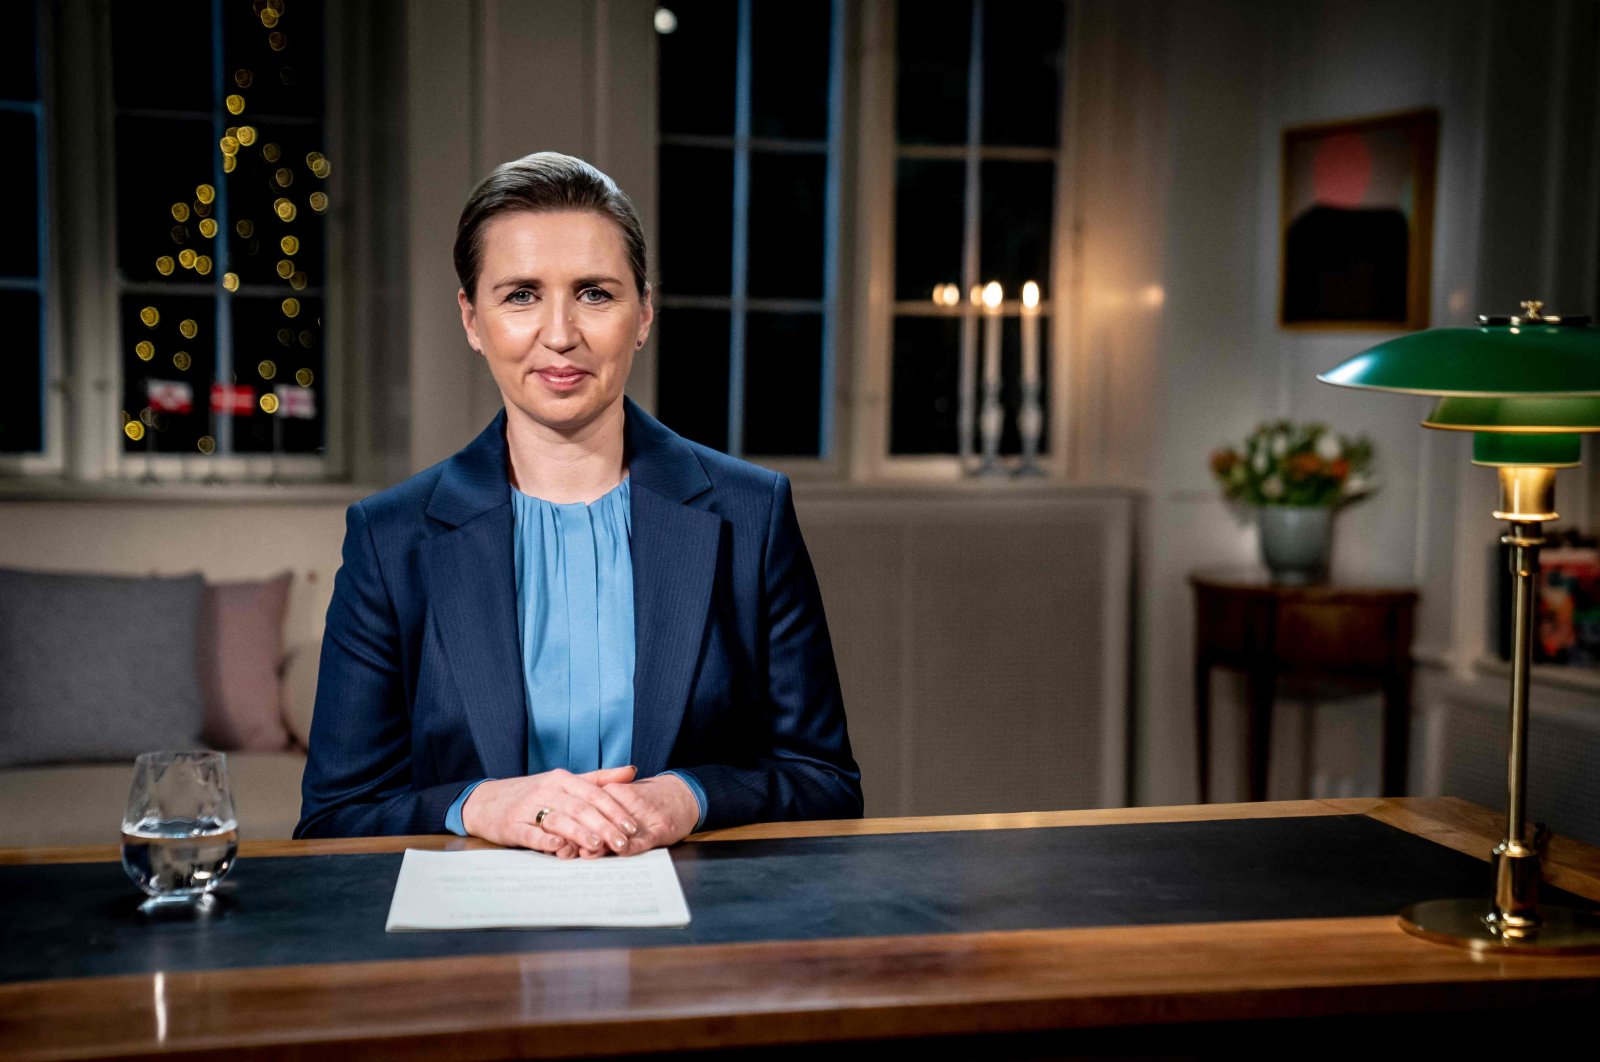 Denmark&#039;s Prime Minister Mette Frederiksen is pictured during the recording of her New Year&#039;s speech at the Prime Ministers representative housing Marienborg in Kongens Lyngby, Denmark, Dec. 30, 2021. (AFP Photo)